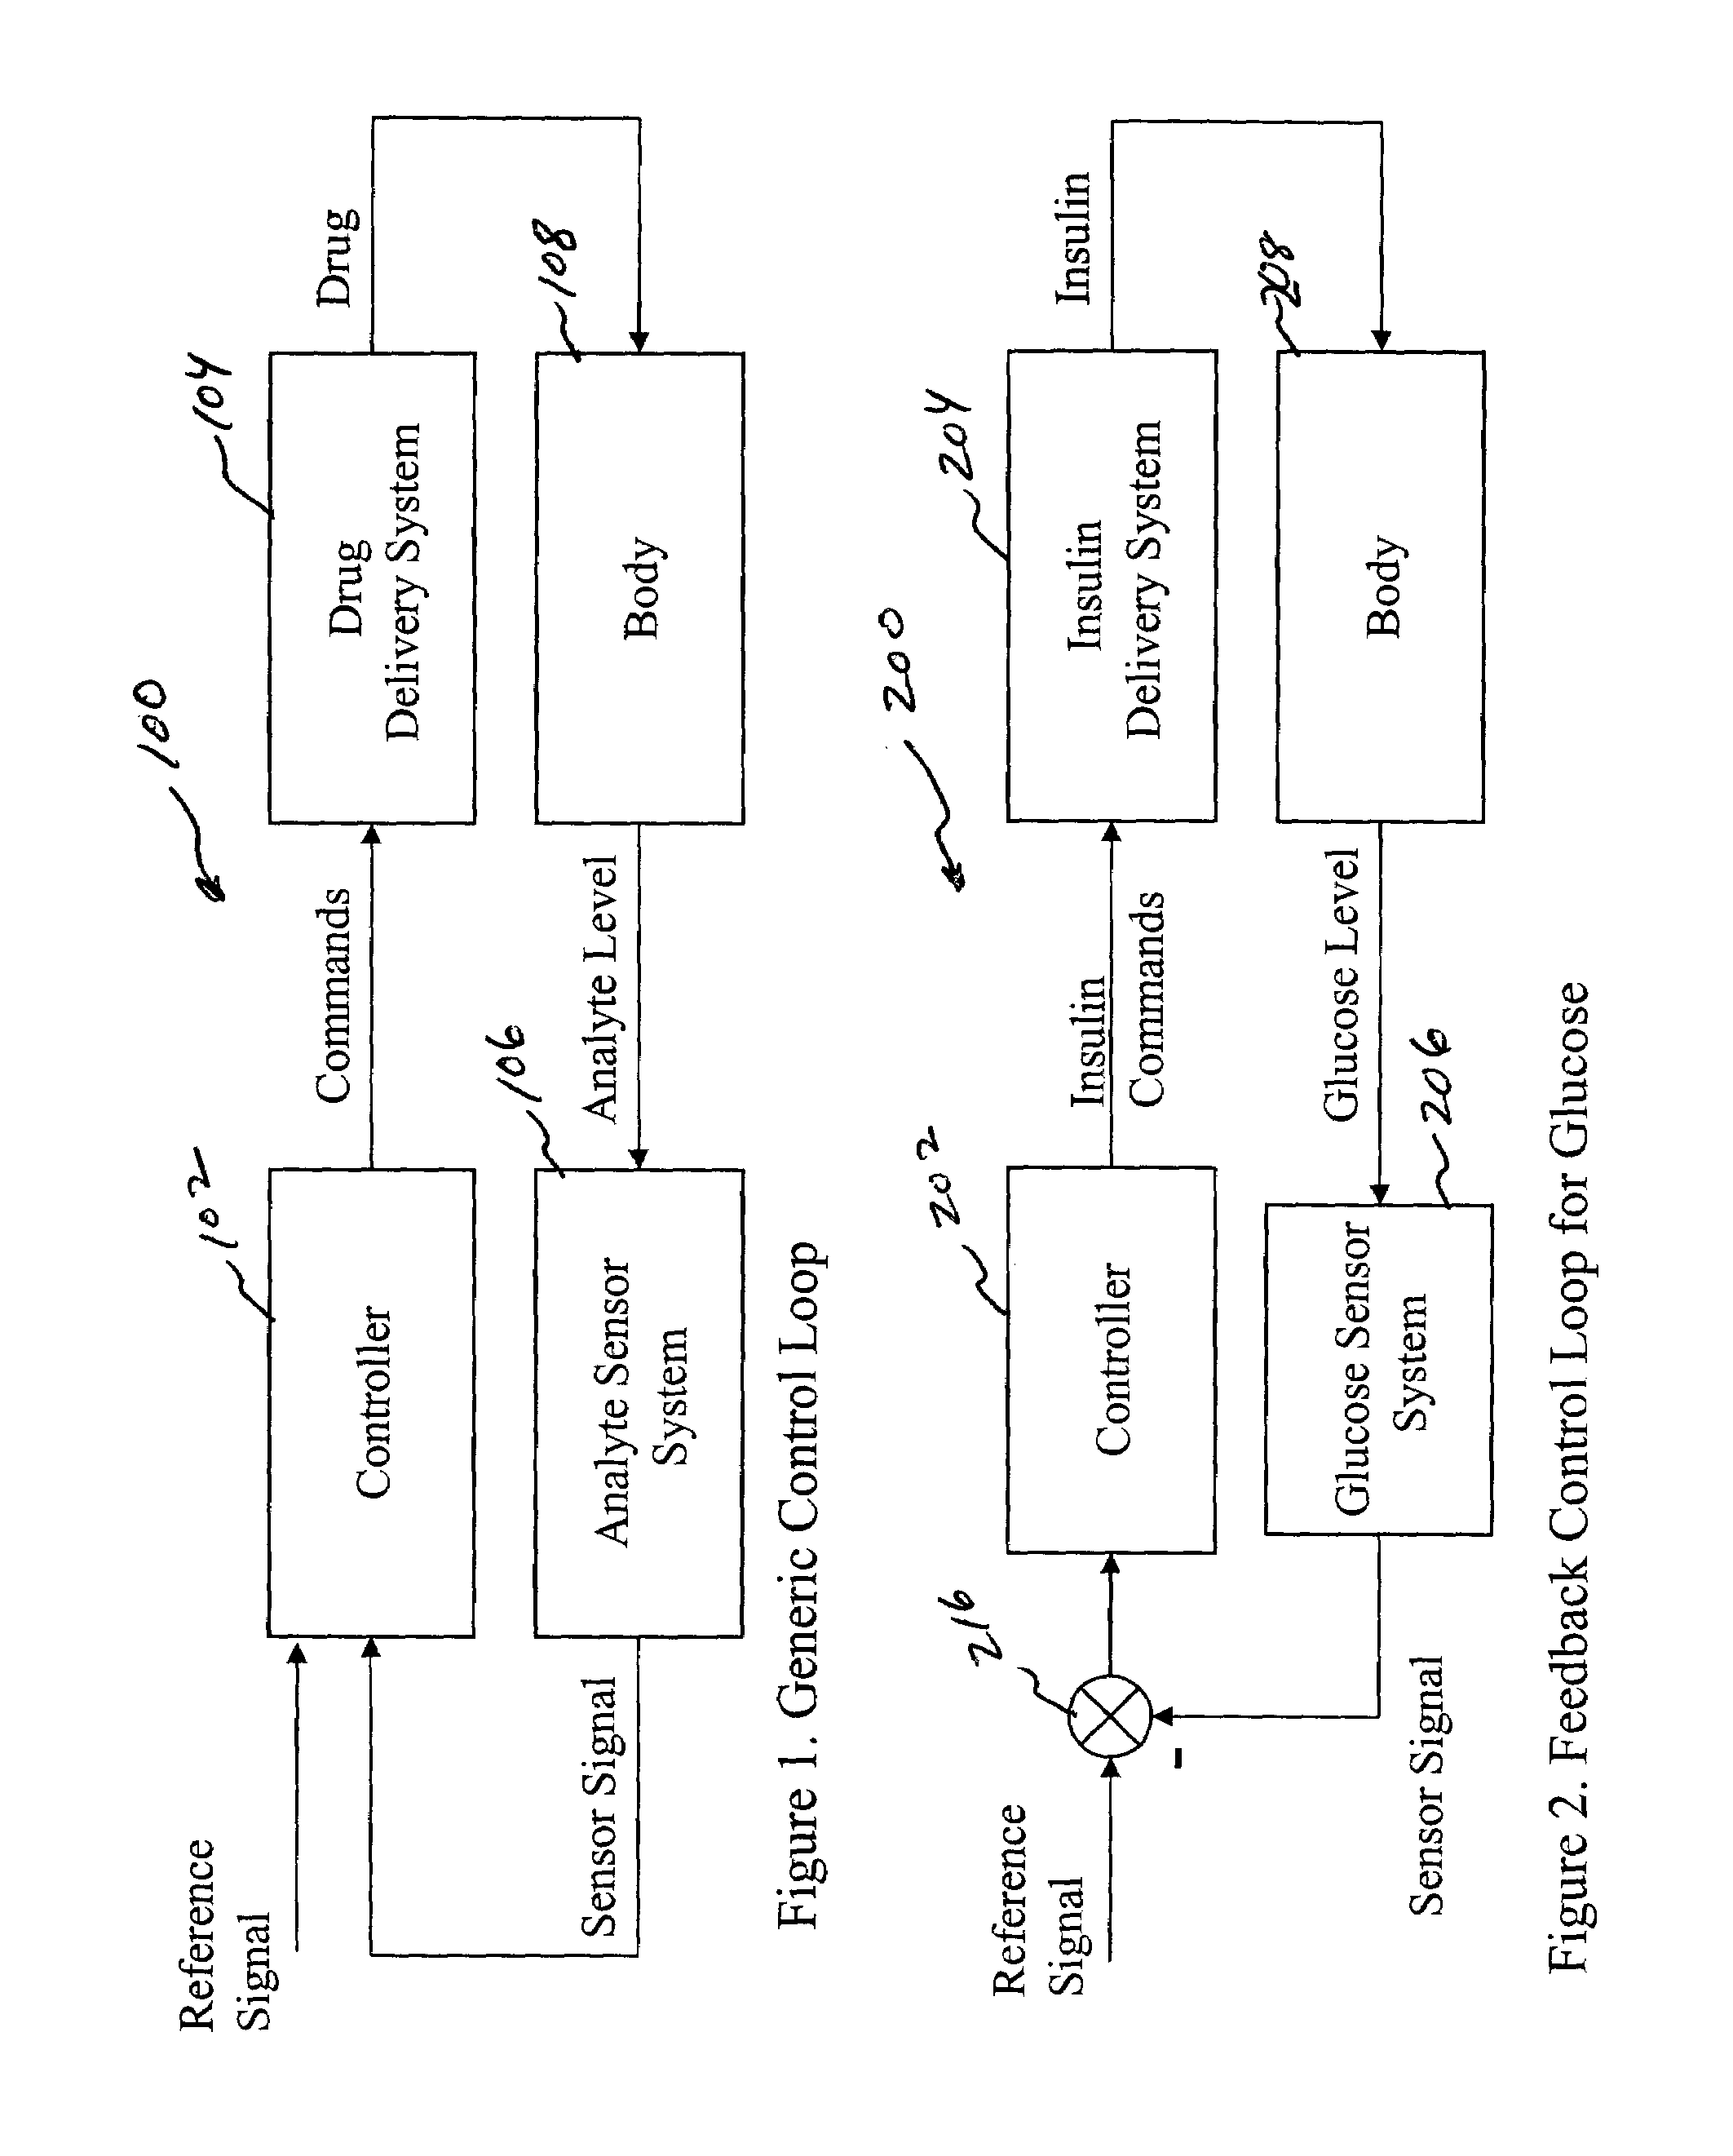 System and method for initiating and maintaining continuous, long-term control of a concentration of a substance in a patient using a feedback or model-based controller coupled to a single-needle or multi-needle intradermal (ID) delivery device